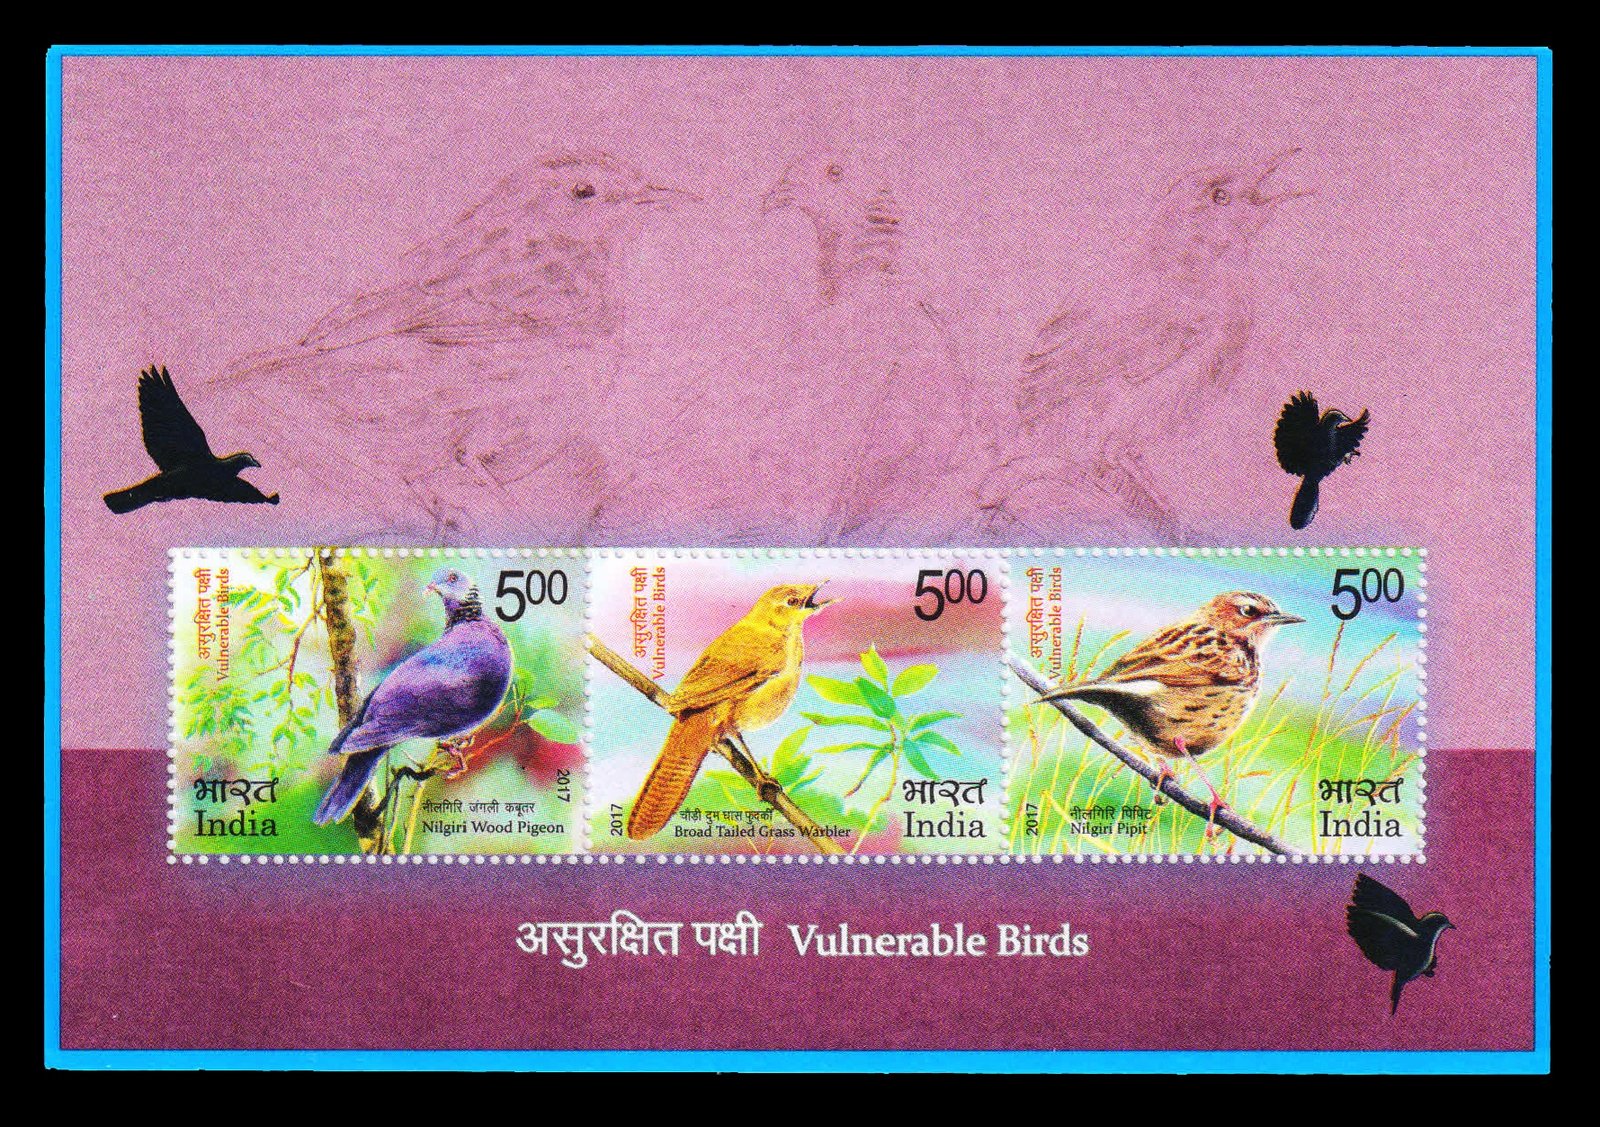 INDIA 2017 - Vulnerable Birds, Miniature Sheet of 3 Stamps, MNH